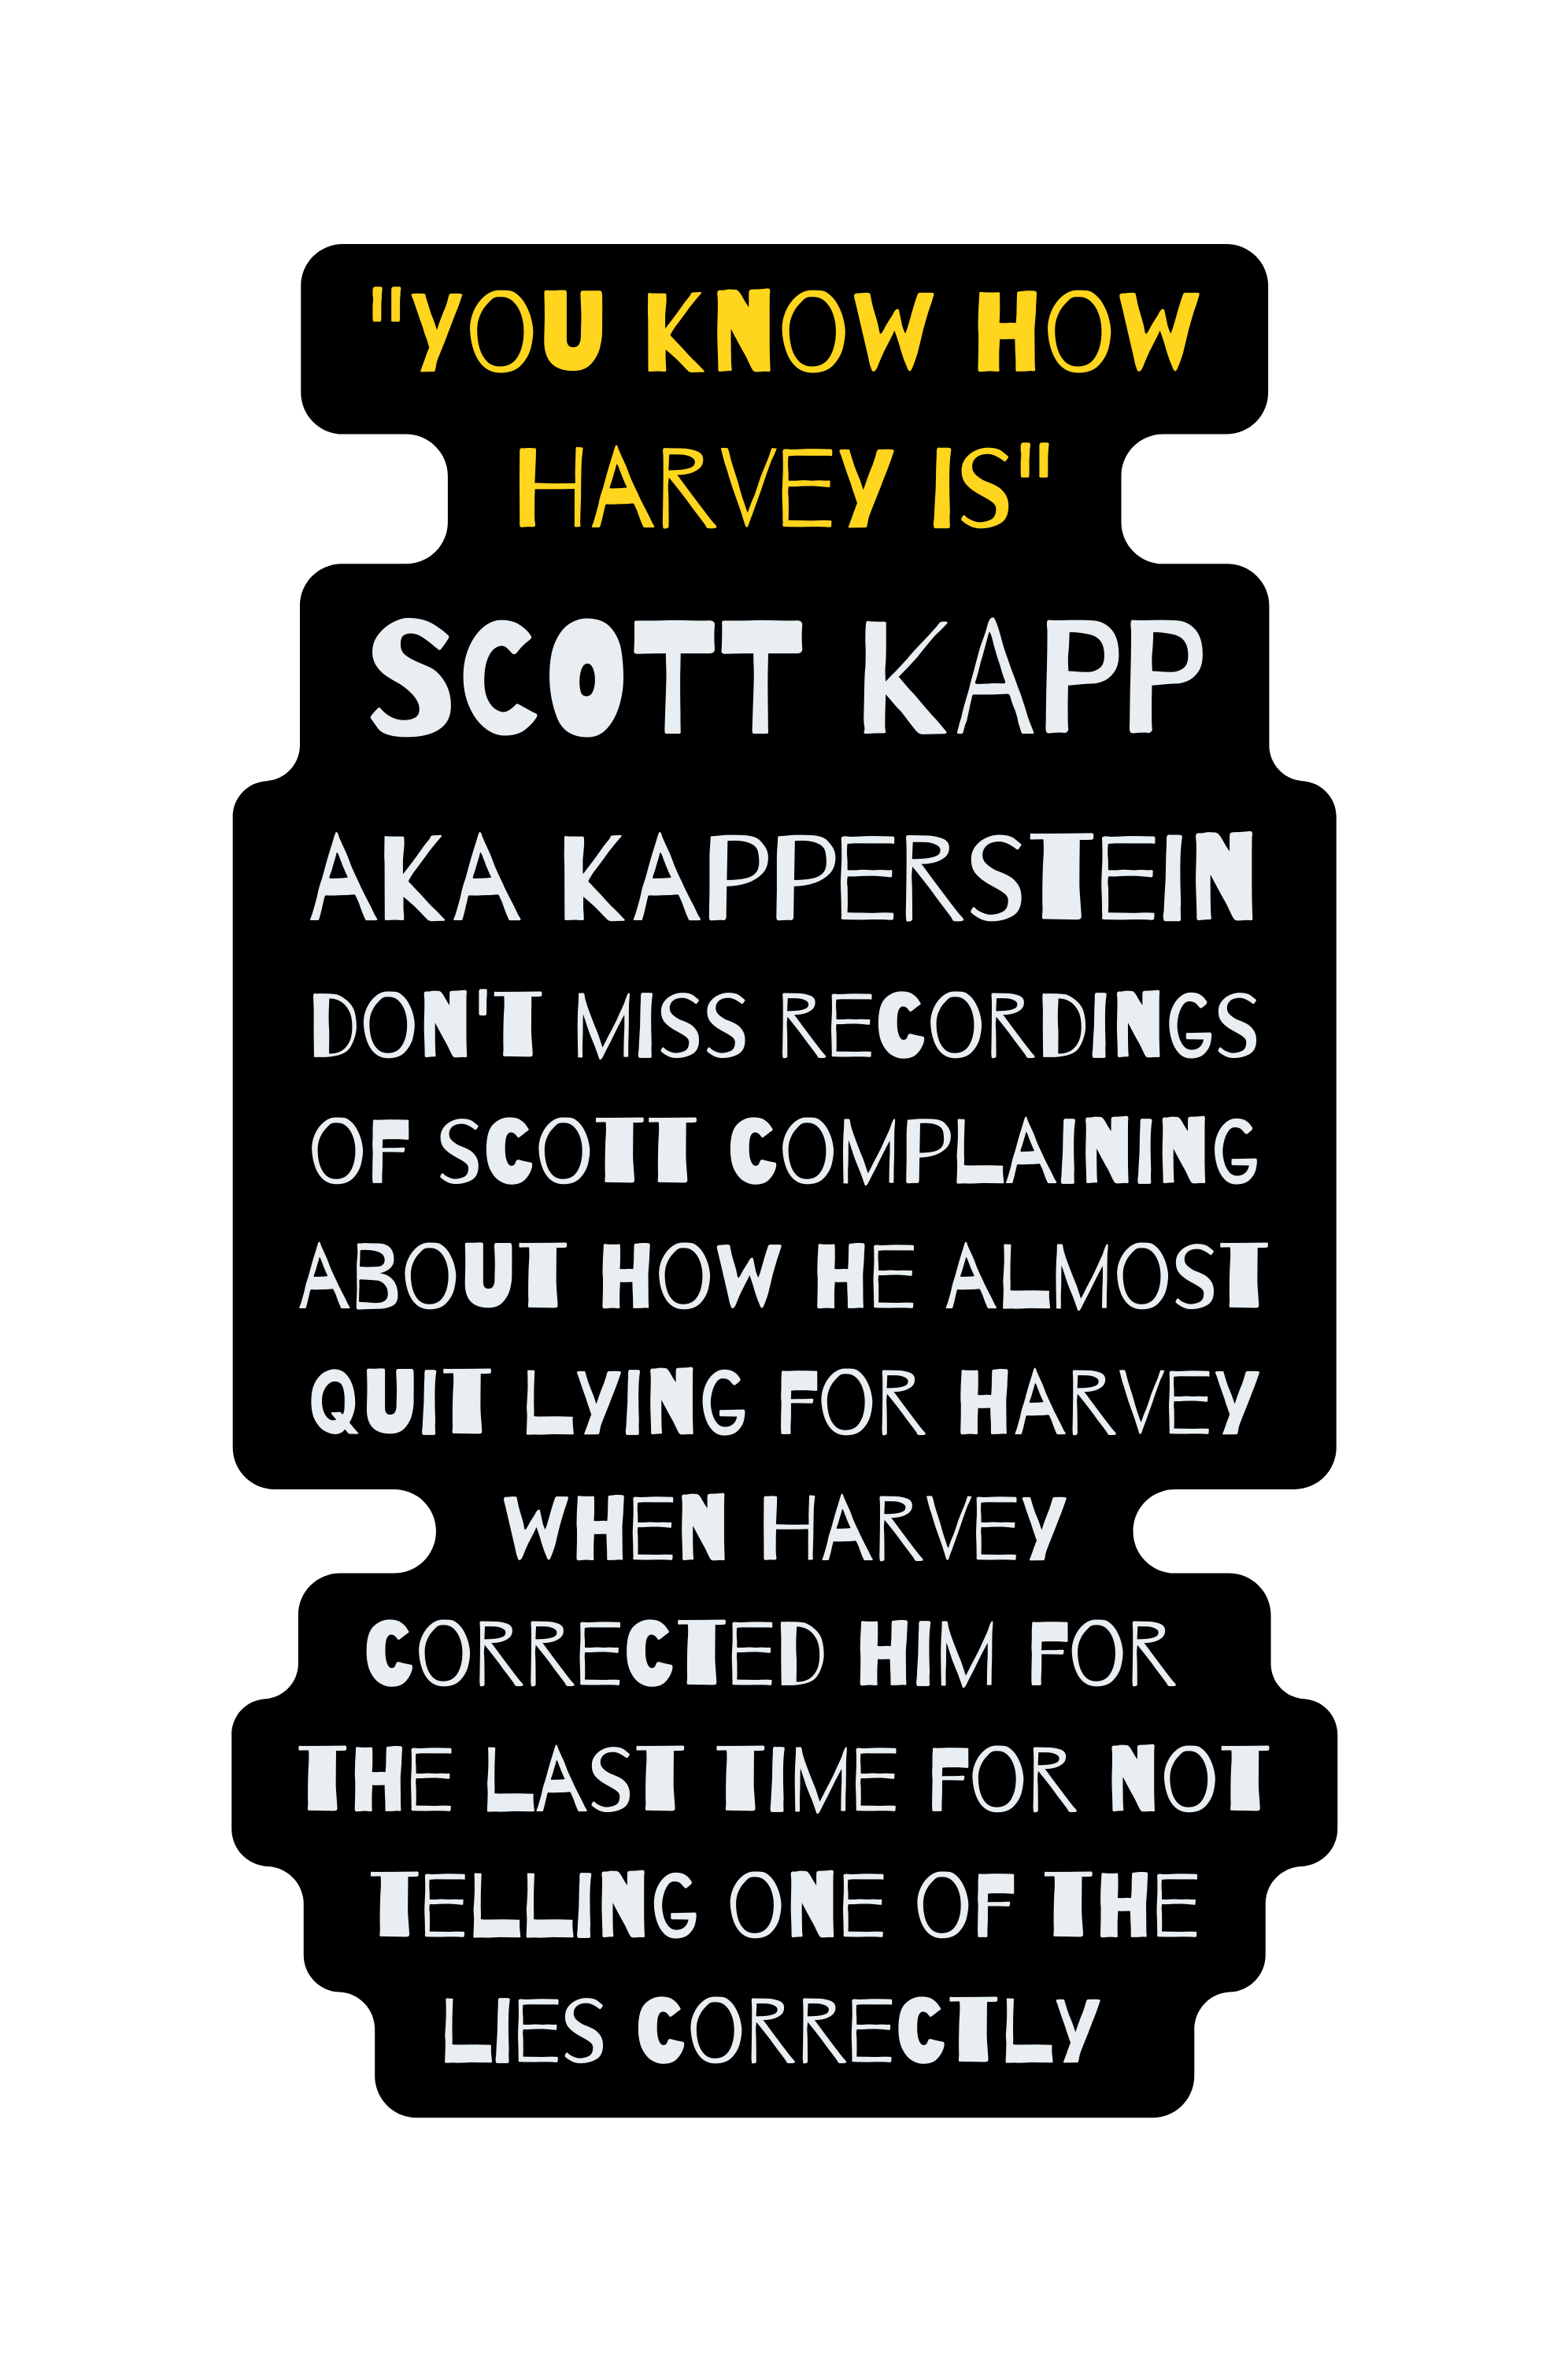 You know how Harvey is SCOTT KAPP aka kapperstein don t miss recordings of scott complaining about how he almost quit lying for harvey when Harvey corrected him for the last time for not telling one of the lies correctly